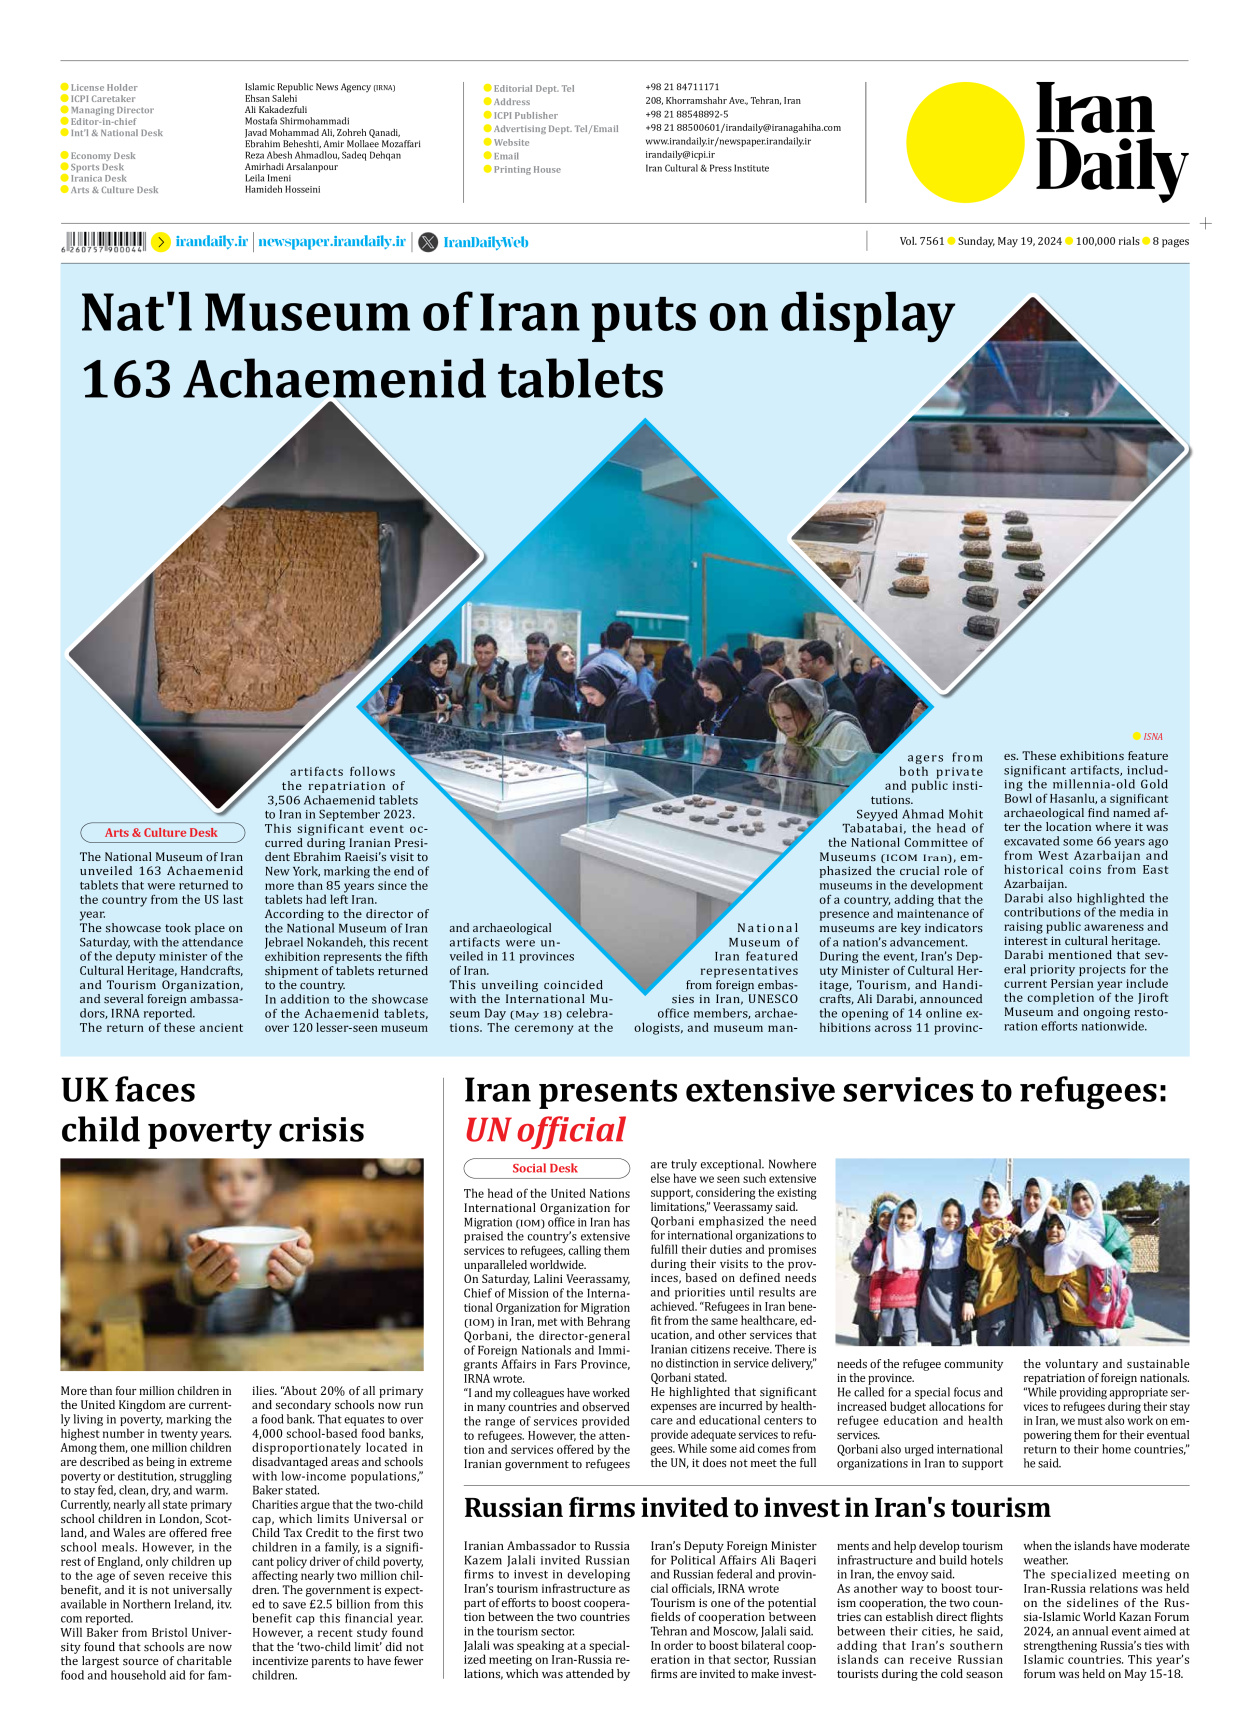 Iran Daily - Number Seven Thousand Five Hundred and Sixty One - 19 May 2024 - Page 8